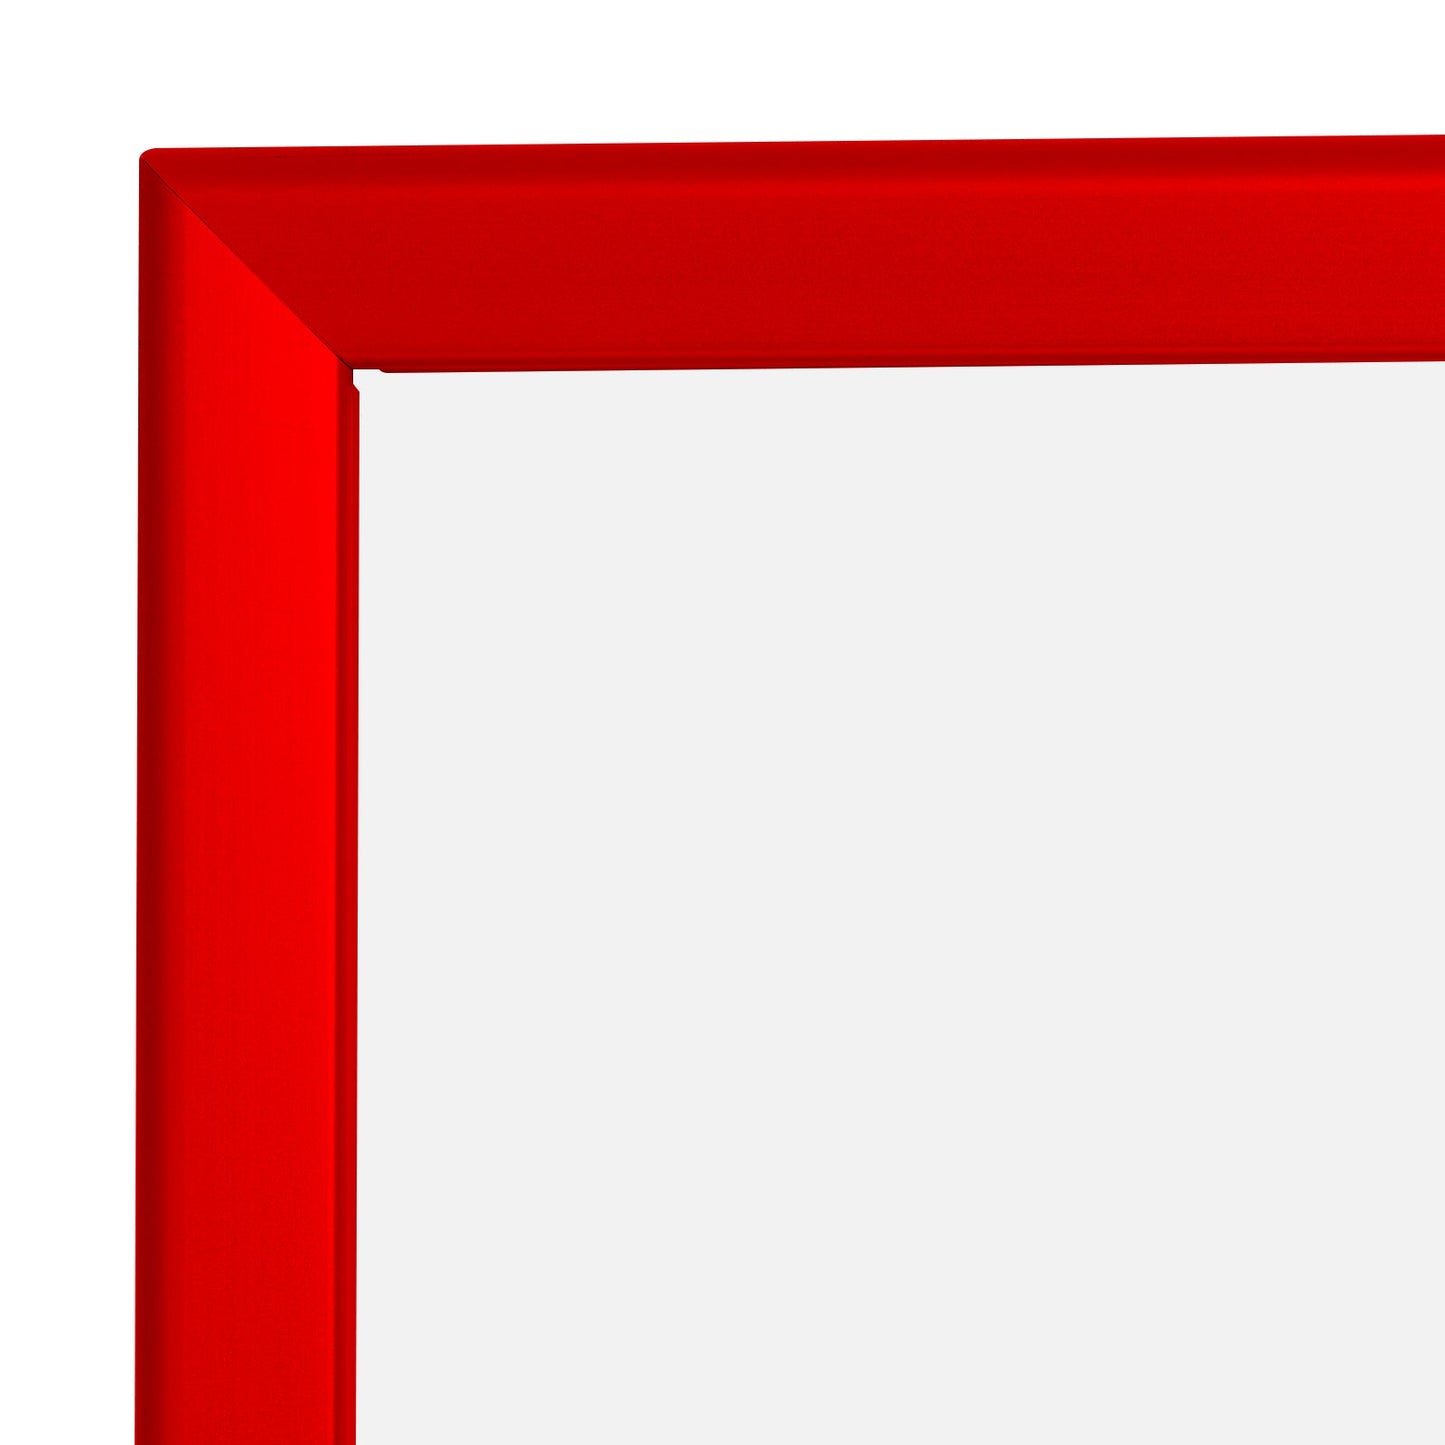 24x30 Red SnapeZo® Snap Frame - 1.25" Profile